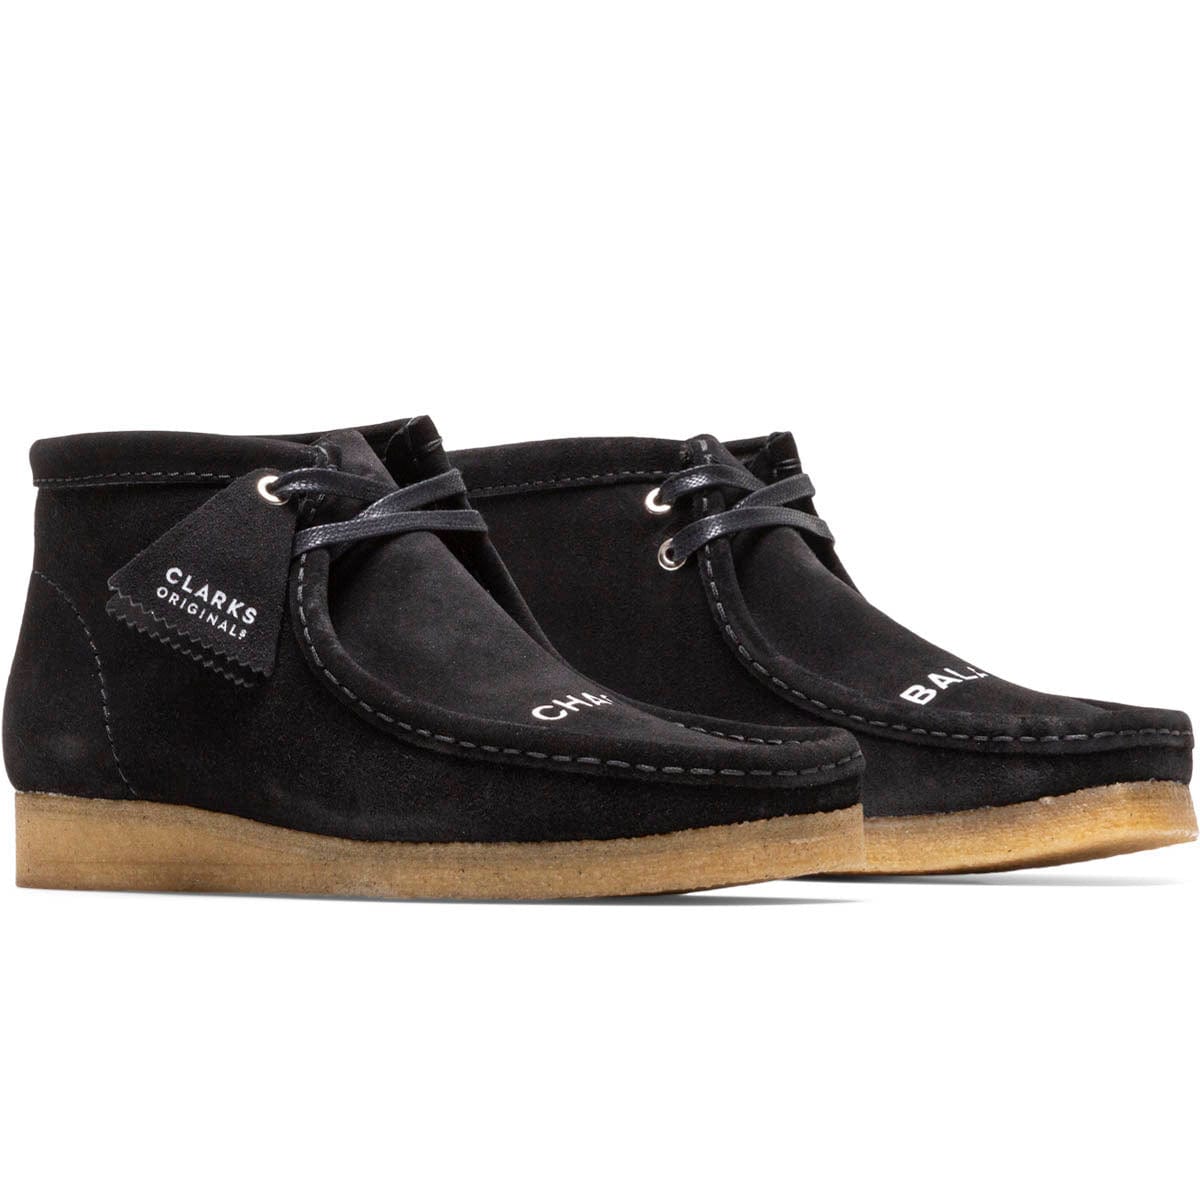 Undercover Boots X CLARKS WALLABEE